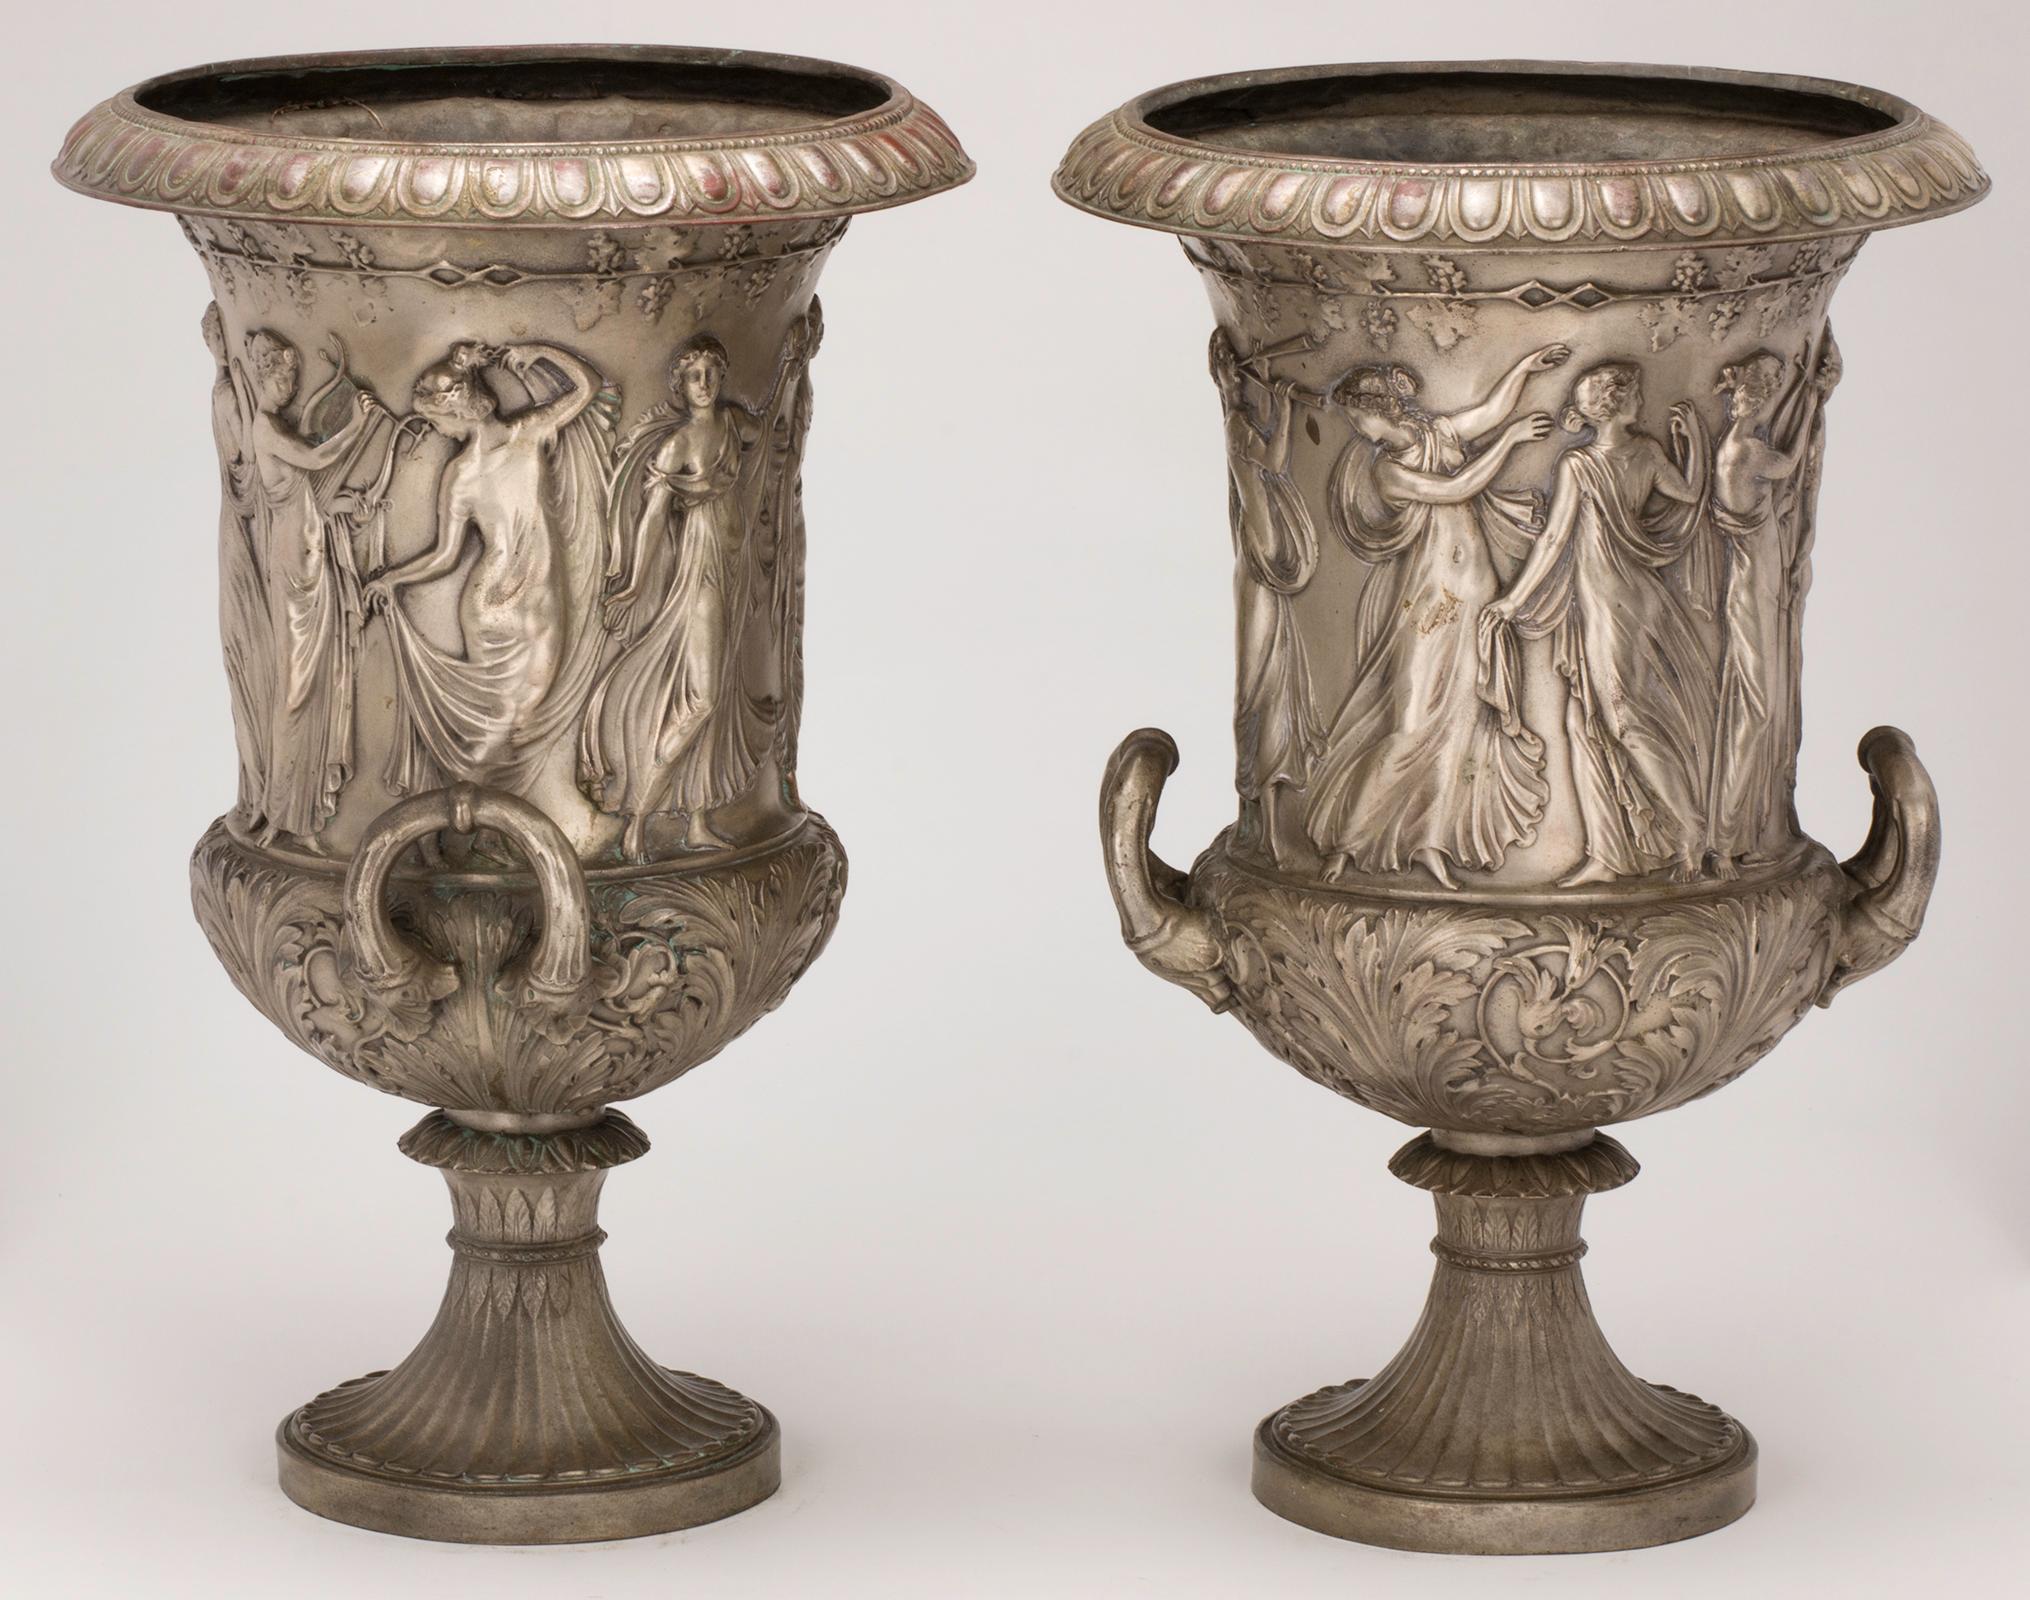 Classical Greek Large Planter Urns, 19th Century Bronze Medici Style, Pair For Sale